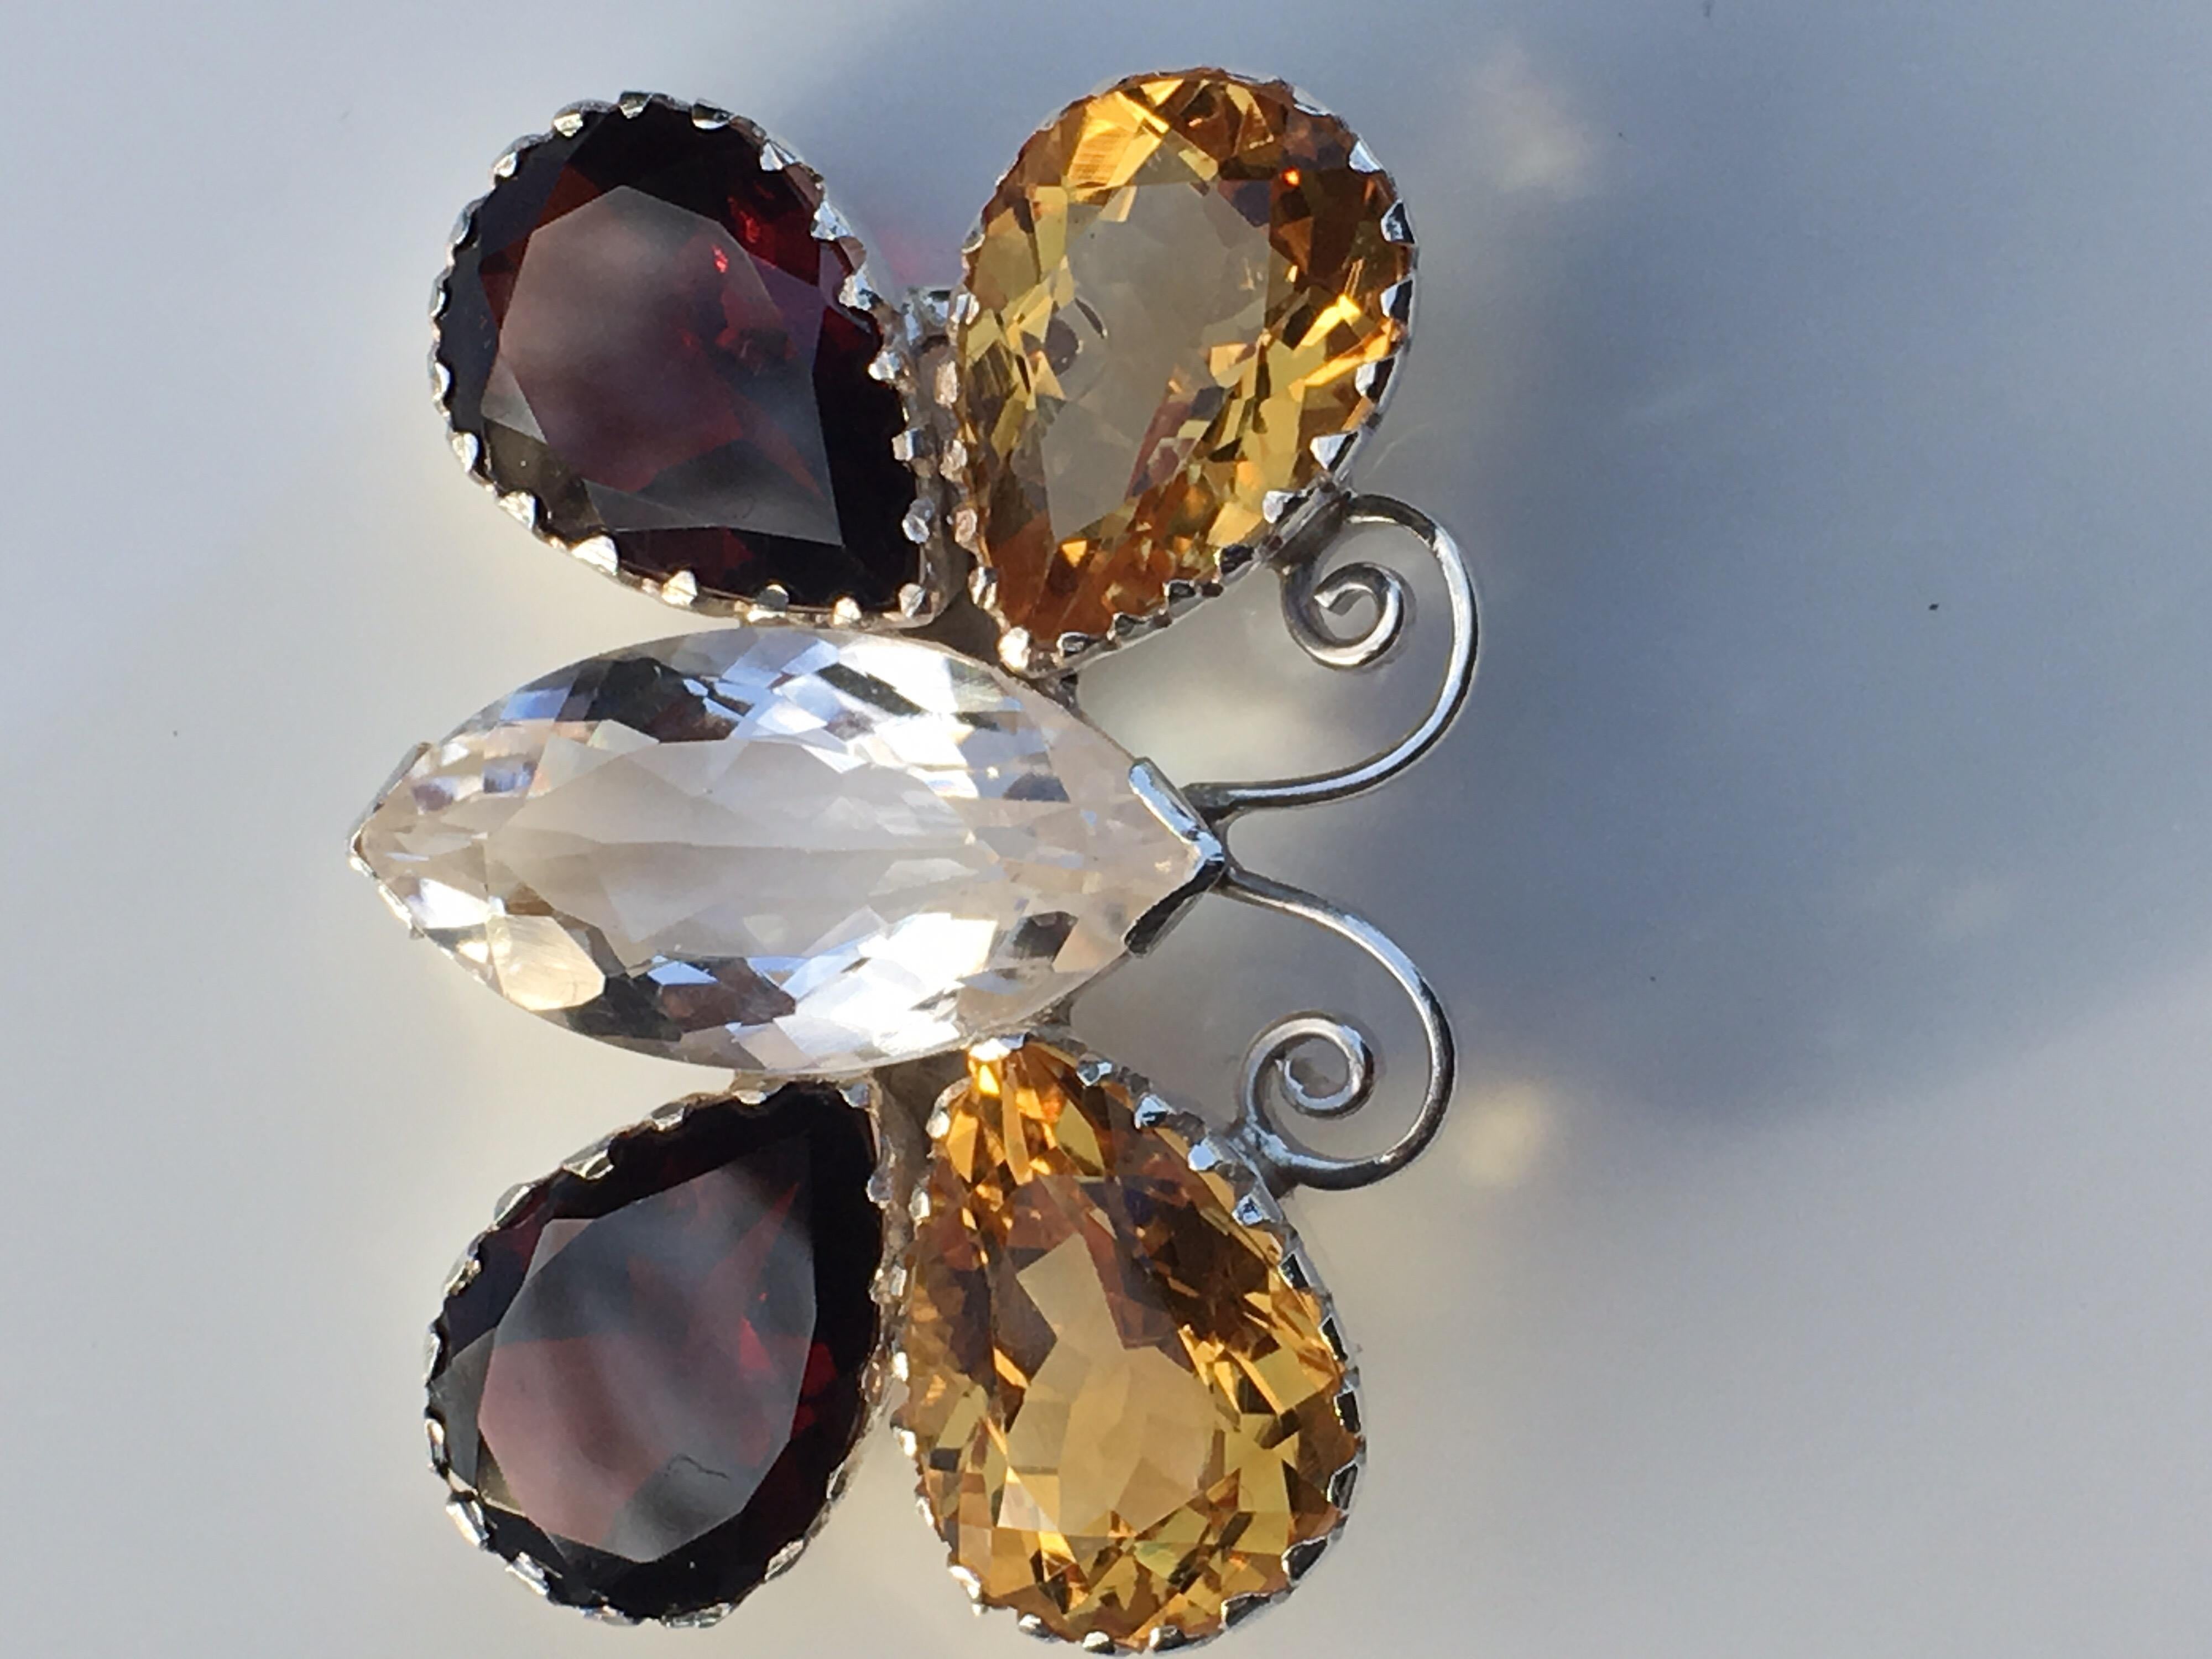 Natural Rock Crystal Red Garnet and Citrine set in sterling silver Hand crafted one of a kind Brooch Pin. The Pin is 12.05 Gram. Approx 28 Carat stones.Size of the Tears Drop is 10 MM X 14 MM and Rock Crystal is 10 MM X 20 MM